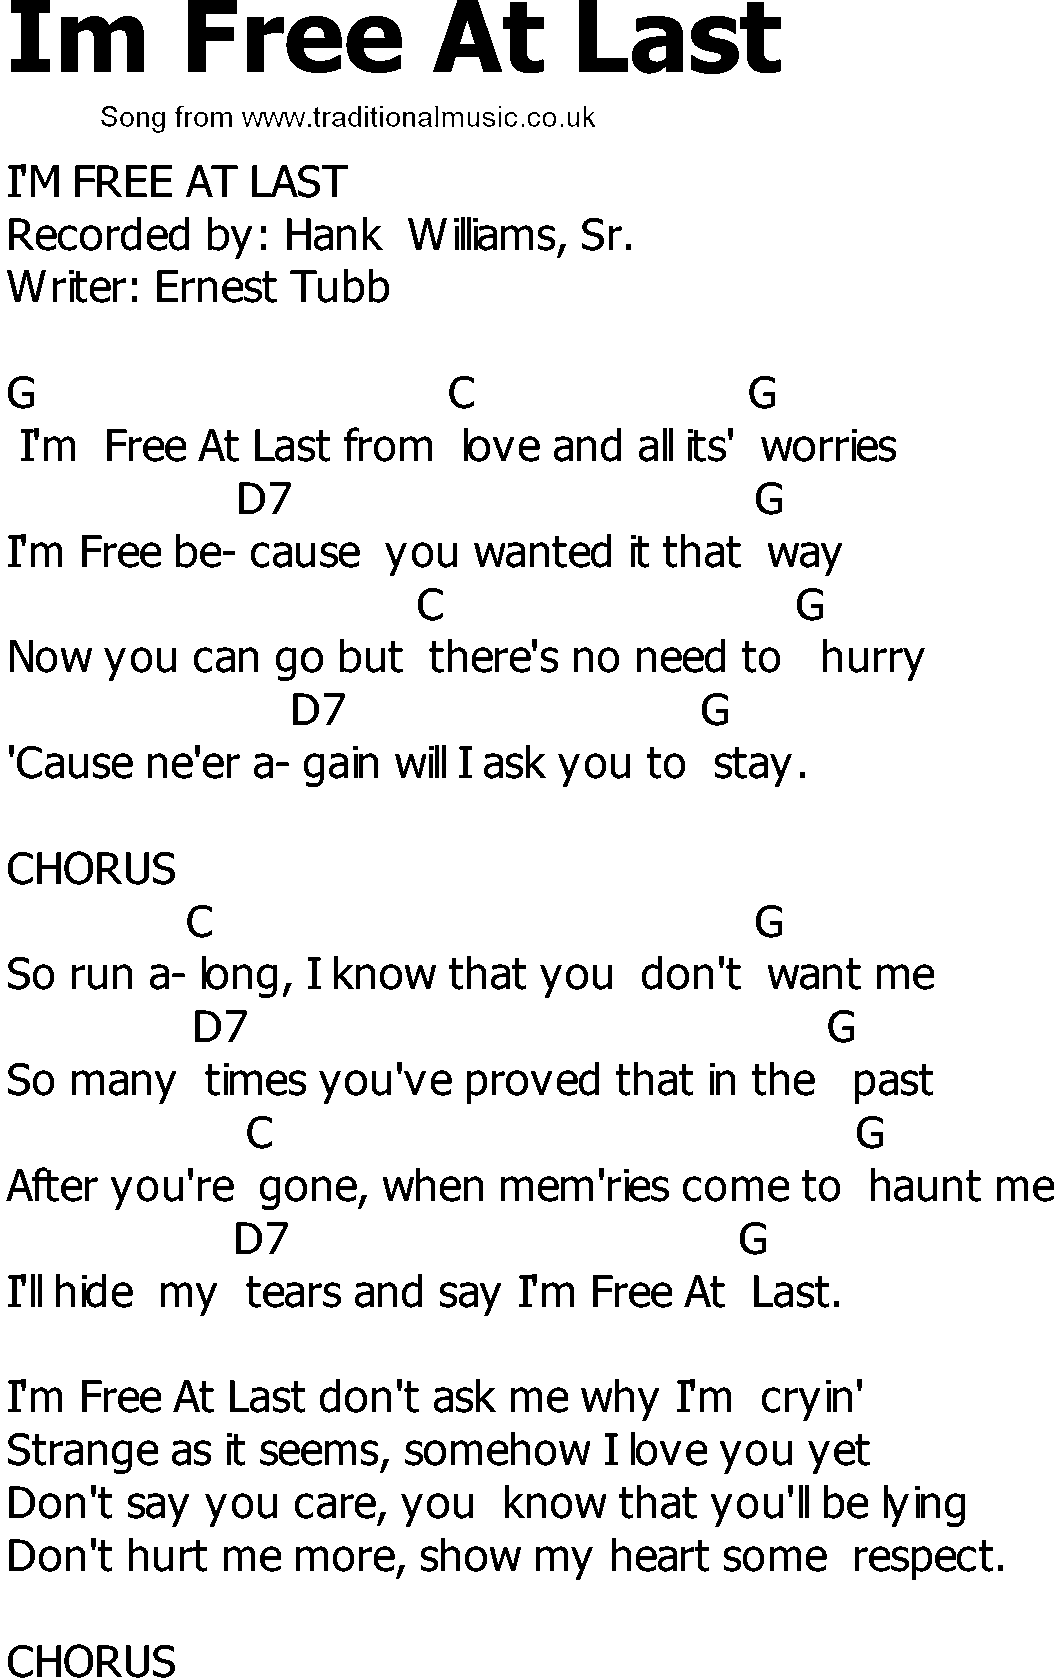 Old Country song lyrics with chords - Im Free At Last